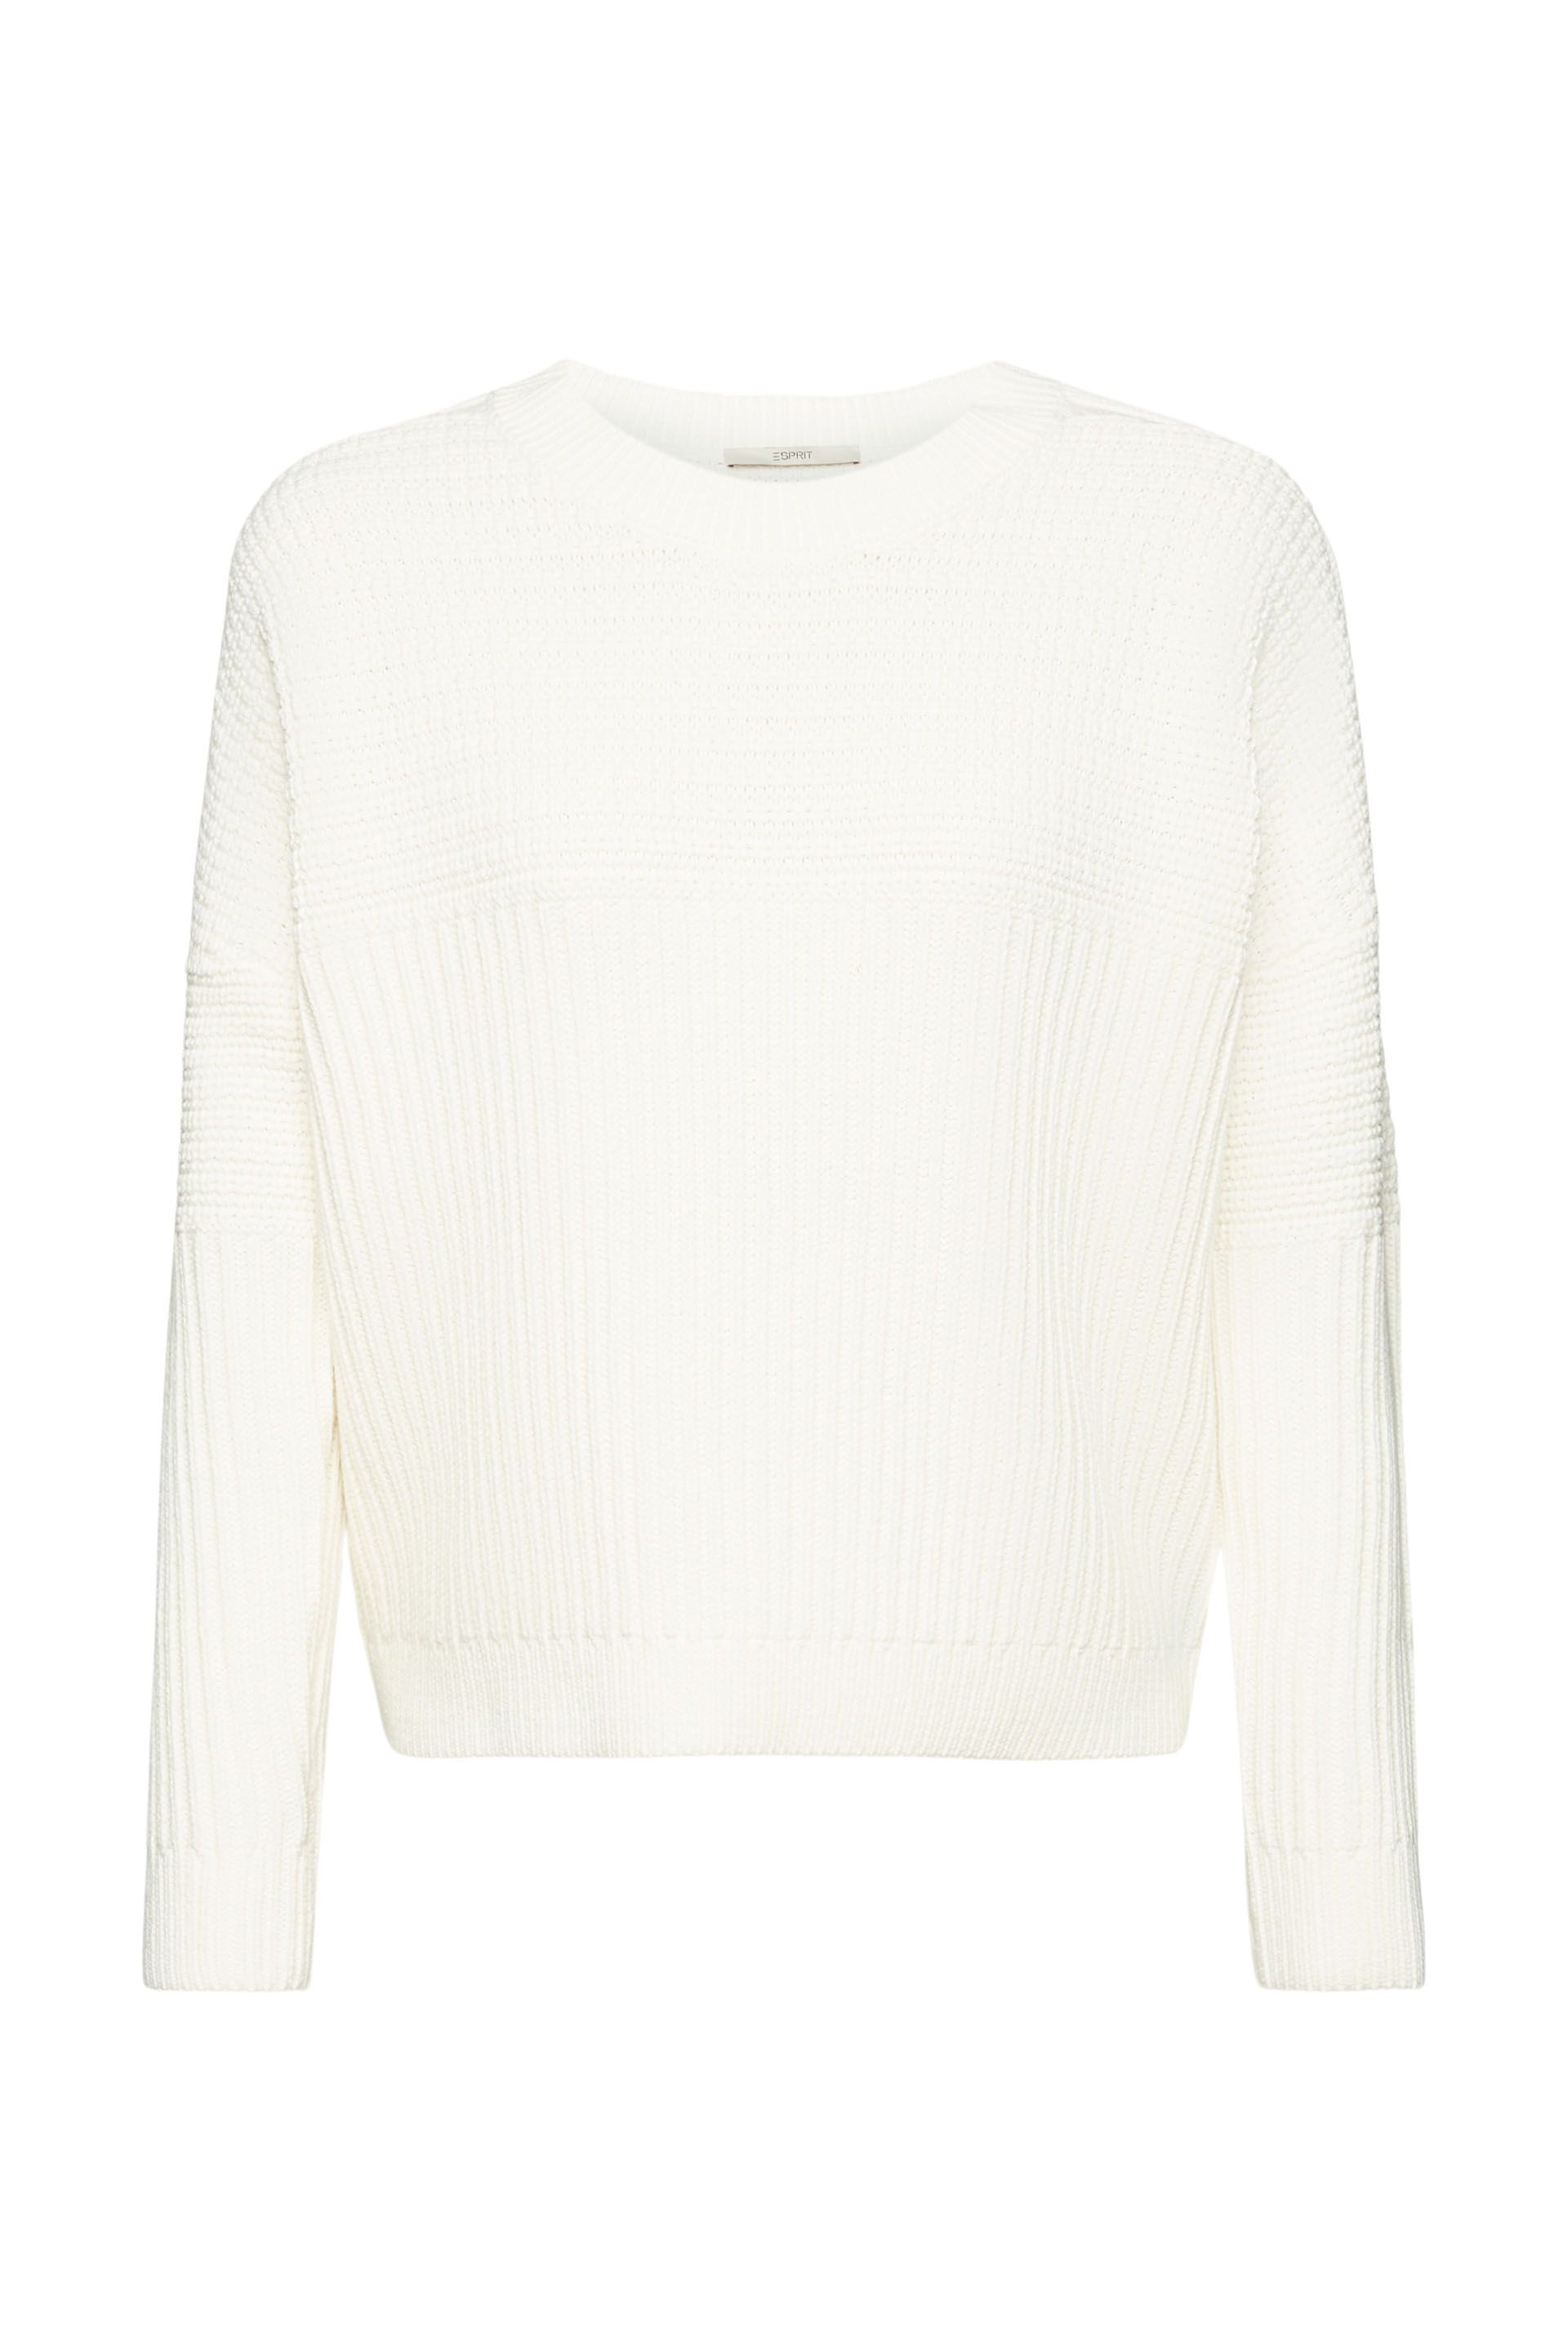 Esprit - Chunky knit pullover in cotton blend, White, large image number 0